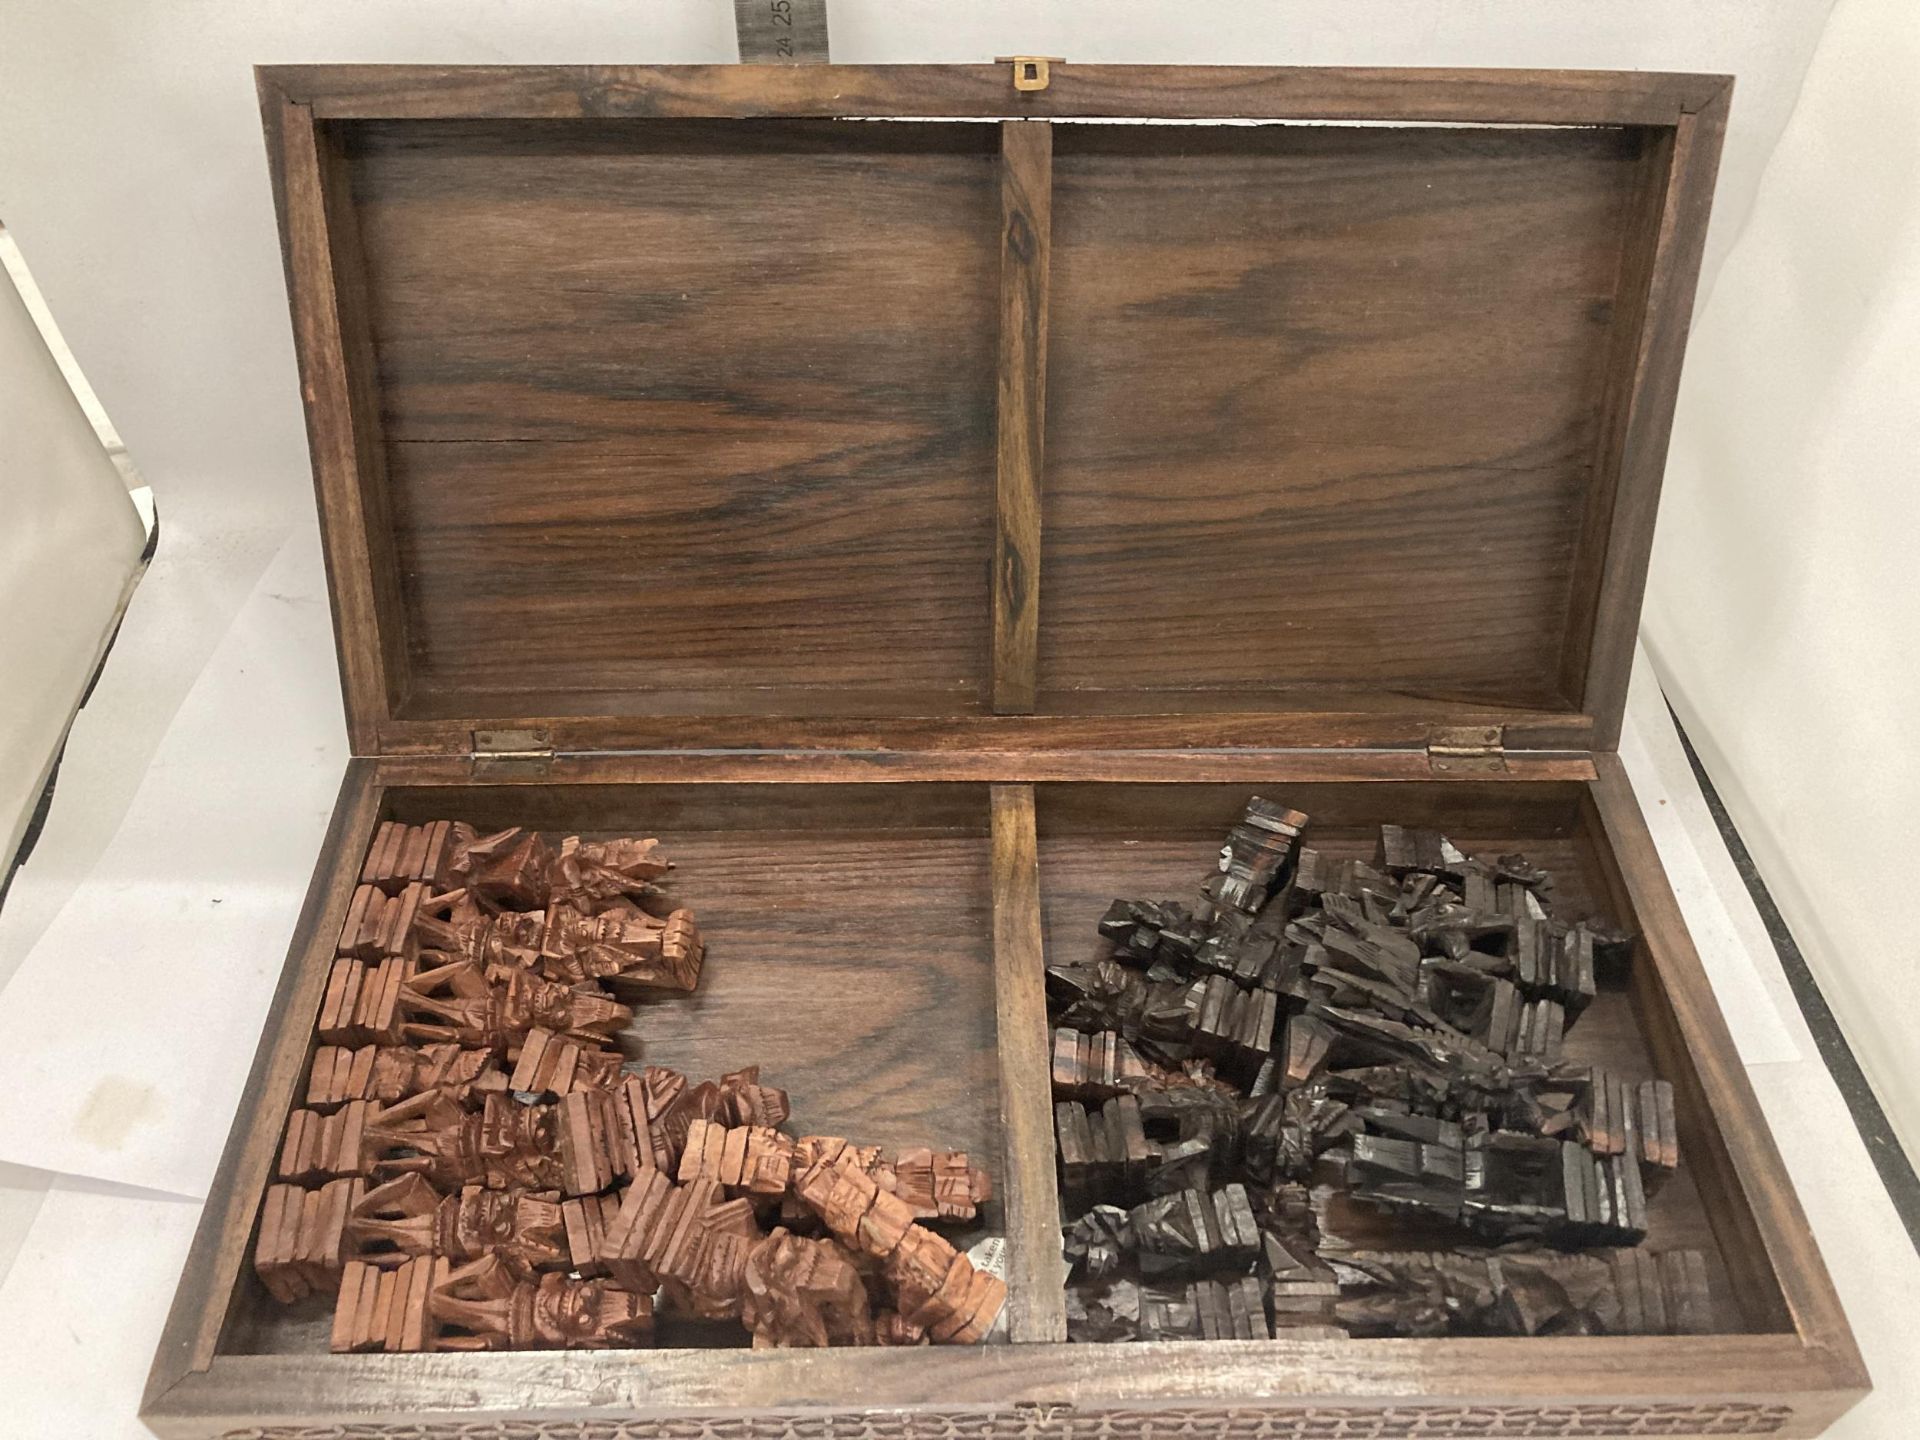 A VINTAGE HARDWOOD CHESS BOARD WITH CARVED WOODEN PIECES - Image 2 of 3